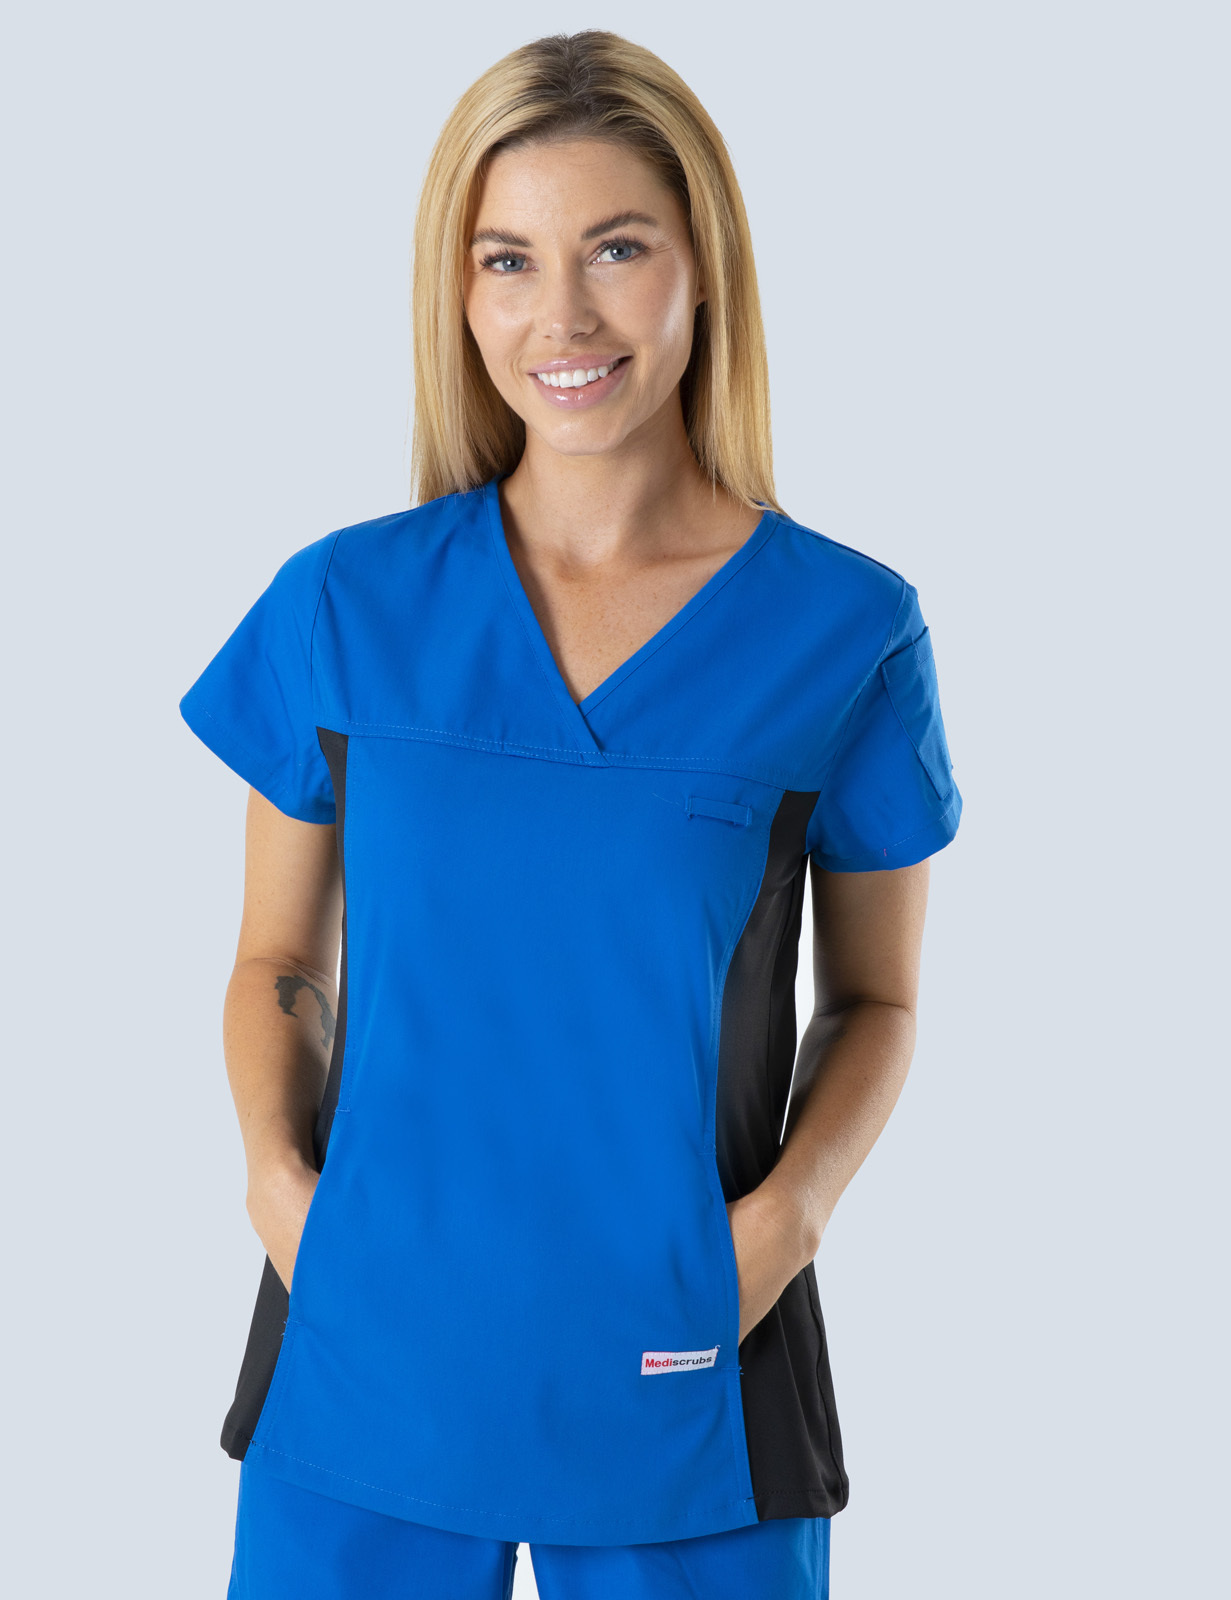 Ashmore Retreat Endorsed Enrolled Nurse Top Only Bundle (Women's Fit Spandex in Royal incl Logo) 